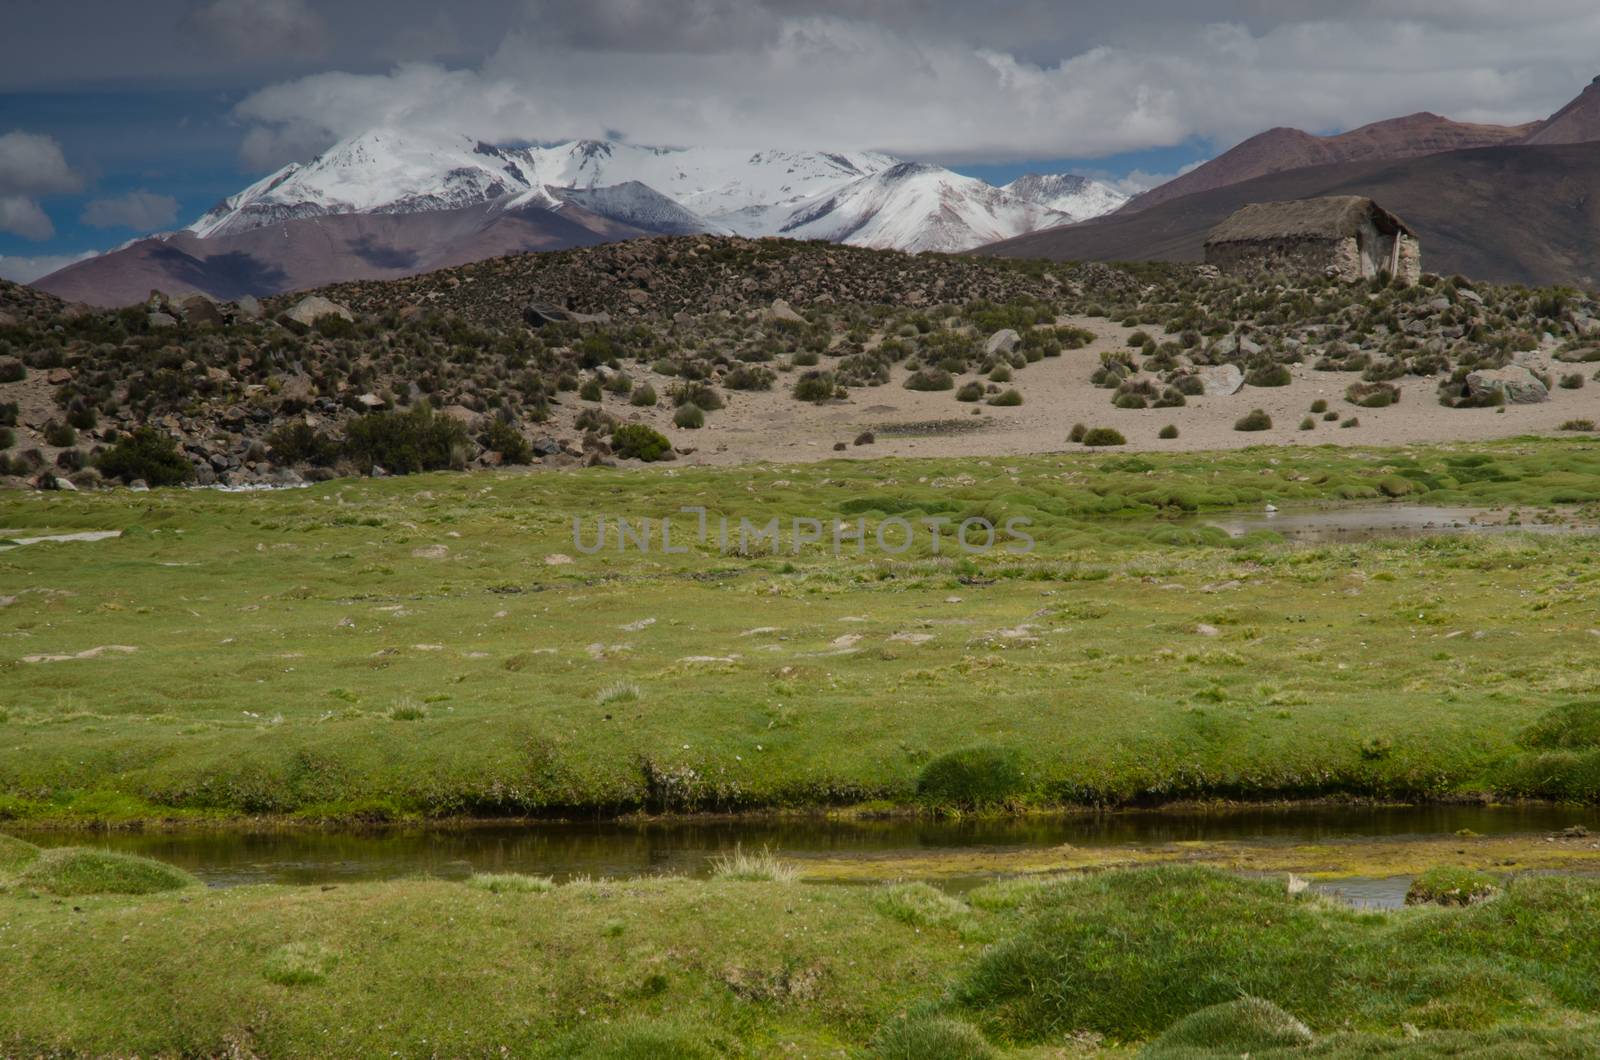 Meadow, hut and mountains in Lauca National Park. by VictorSuarez